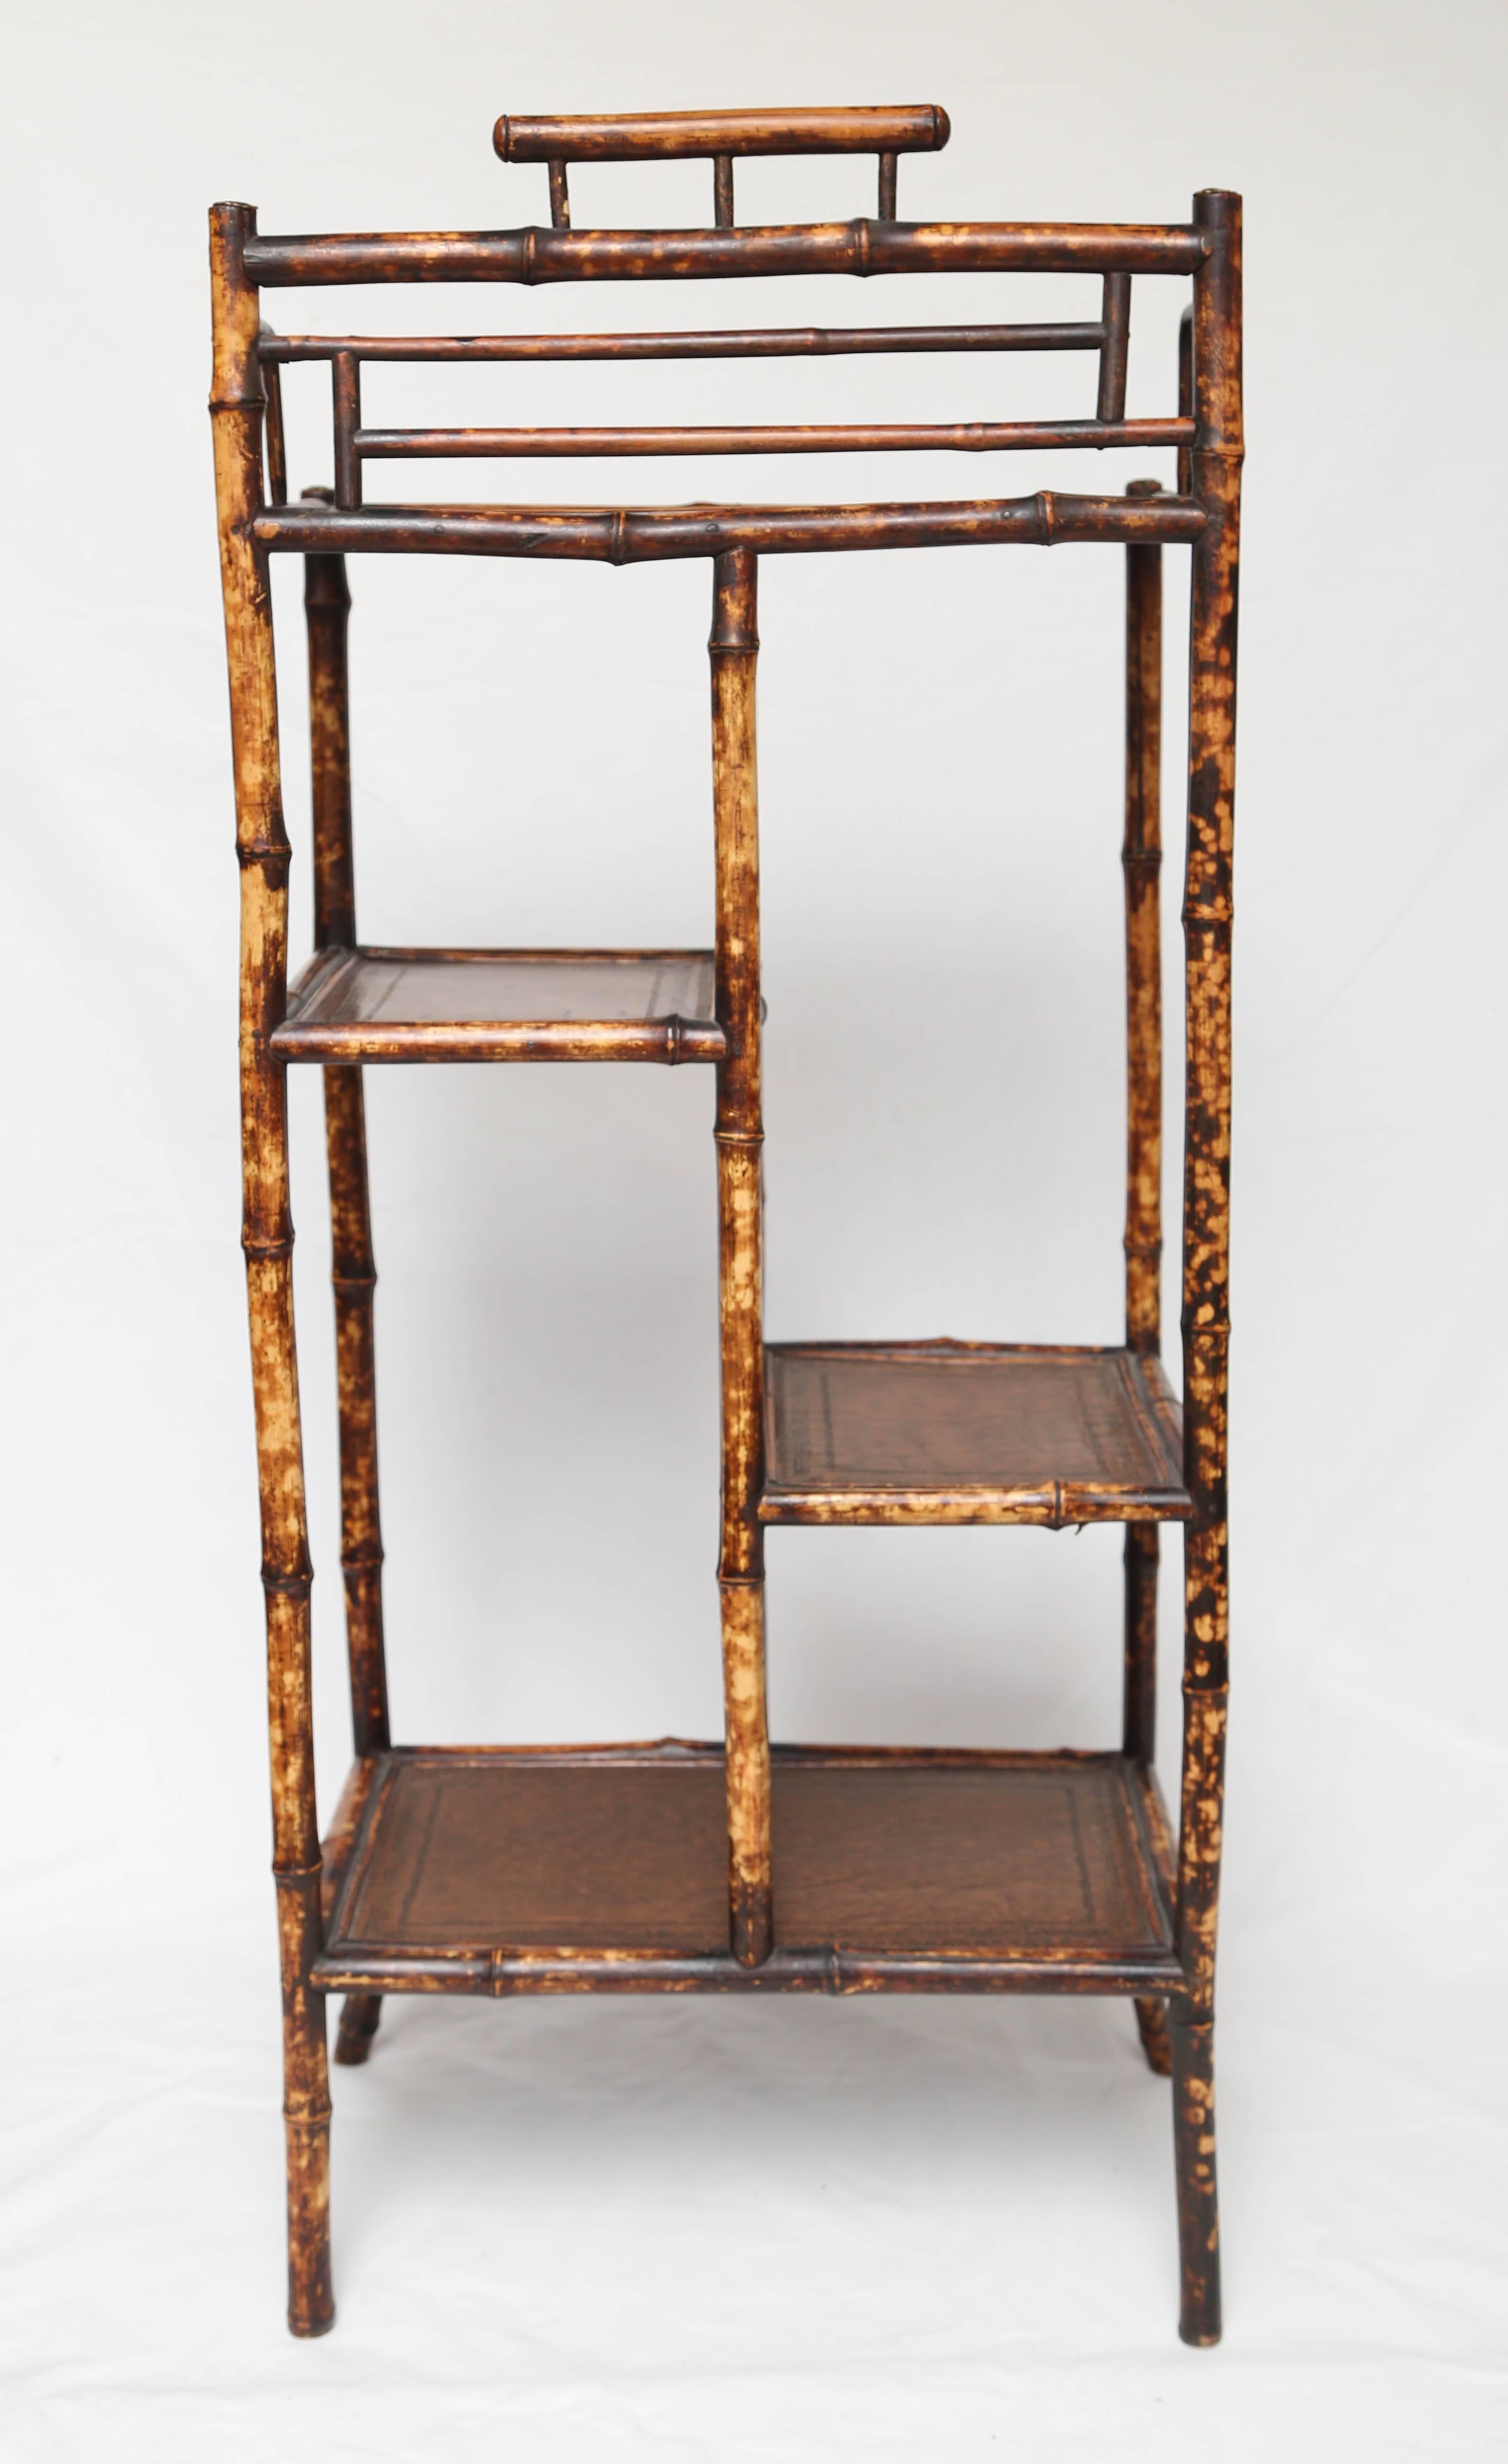 Very sweet tortoiseshell 19th century English bamboo etagere with embossed leather tops. All original.